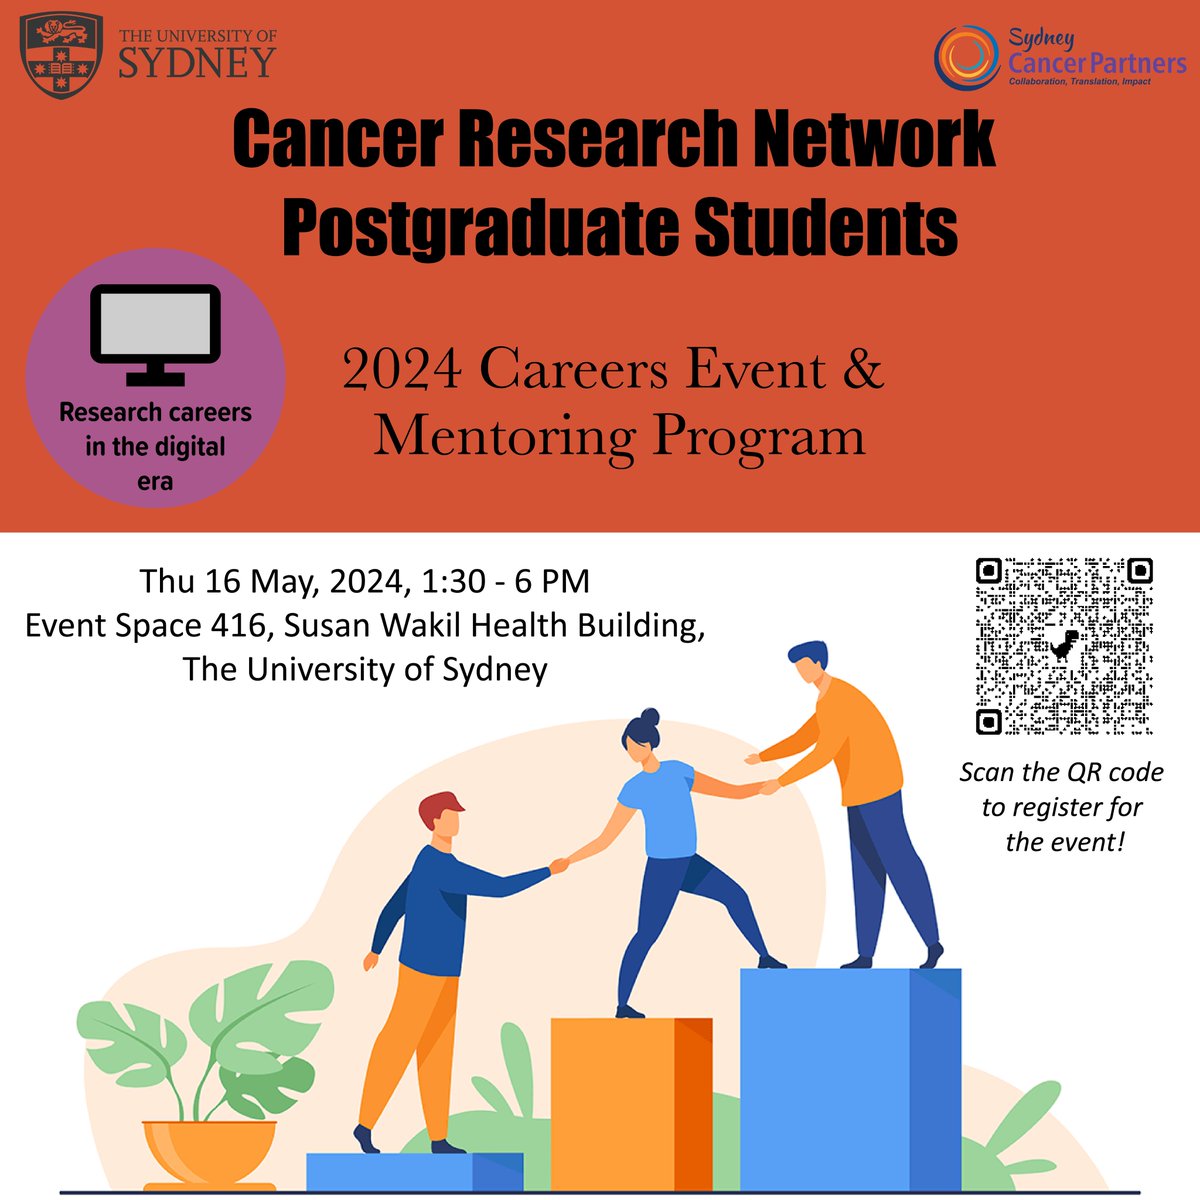 Last chance to register for the CRN mentoring program! Submit your EOI by April 5th and join us at the Careers Event & Mentoring Program on May 16th. @SydCancerPtnrs @syd_health #mentoring #CancerResearch #HDRstudents #USYD #FMH eventbrite.com.au/e/2024-crn-pos…